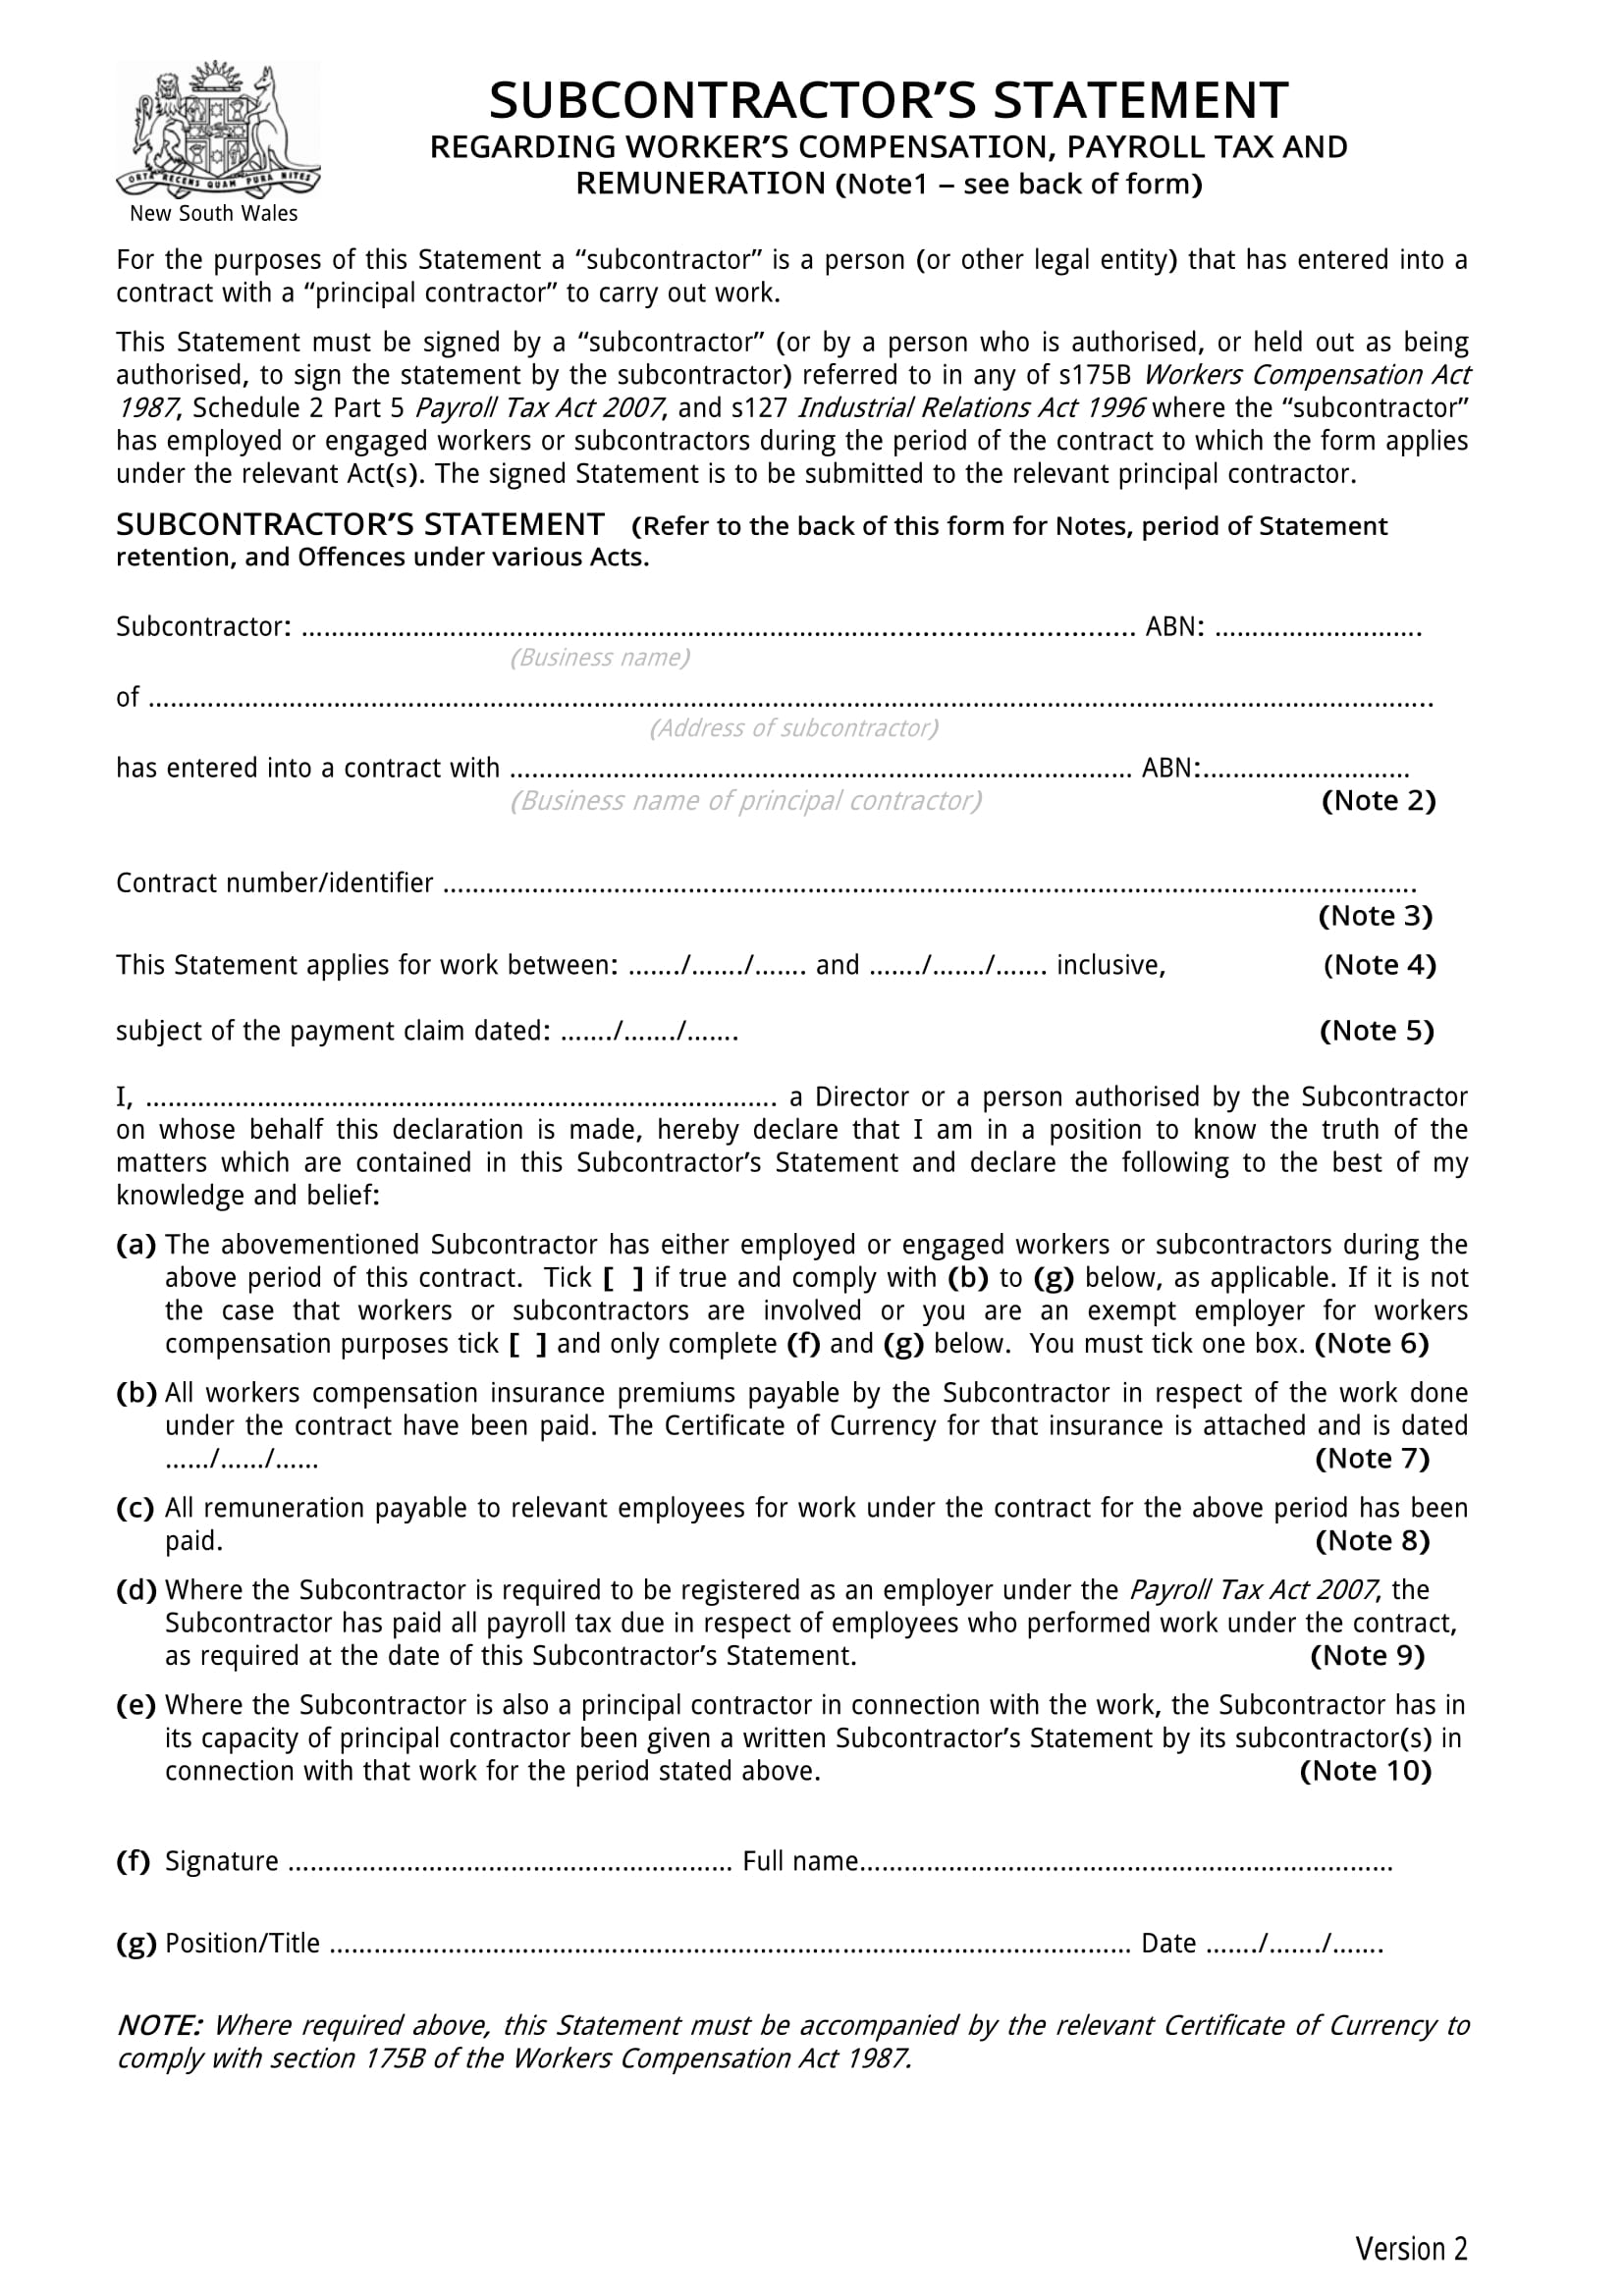 subcontractor tax agreement form 1